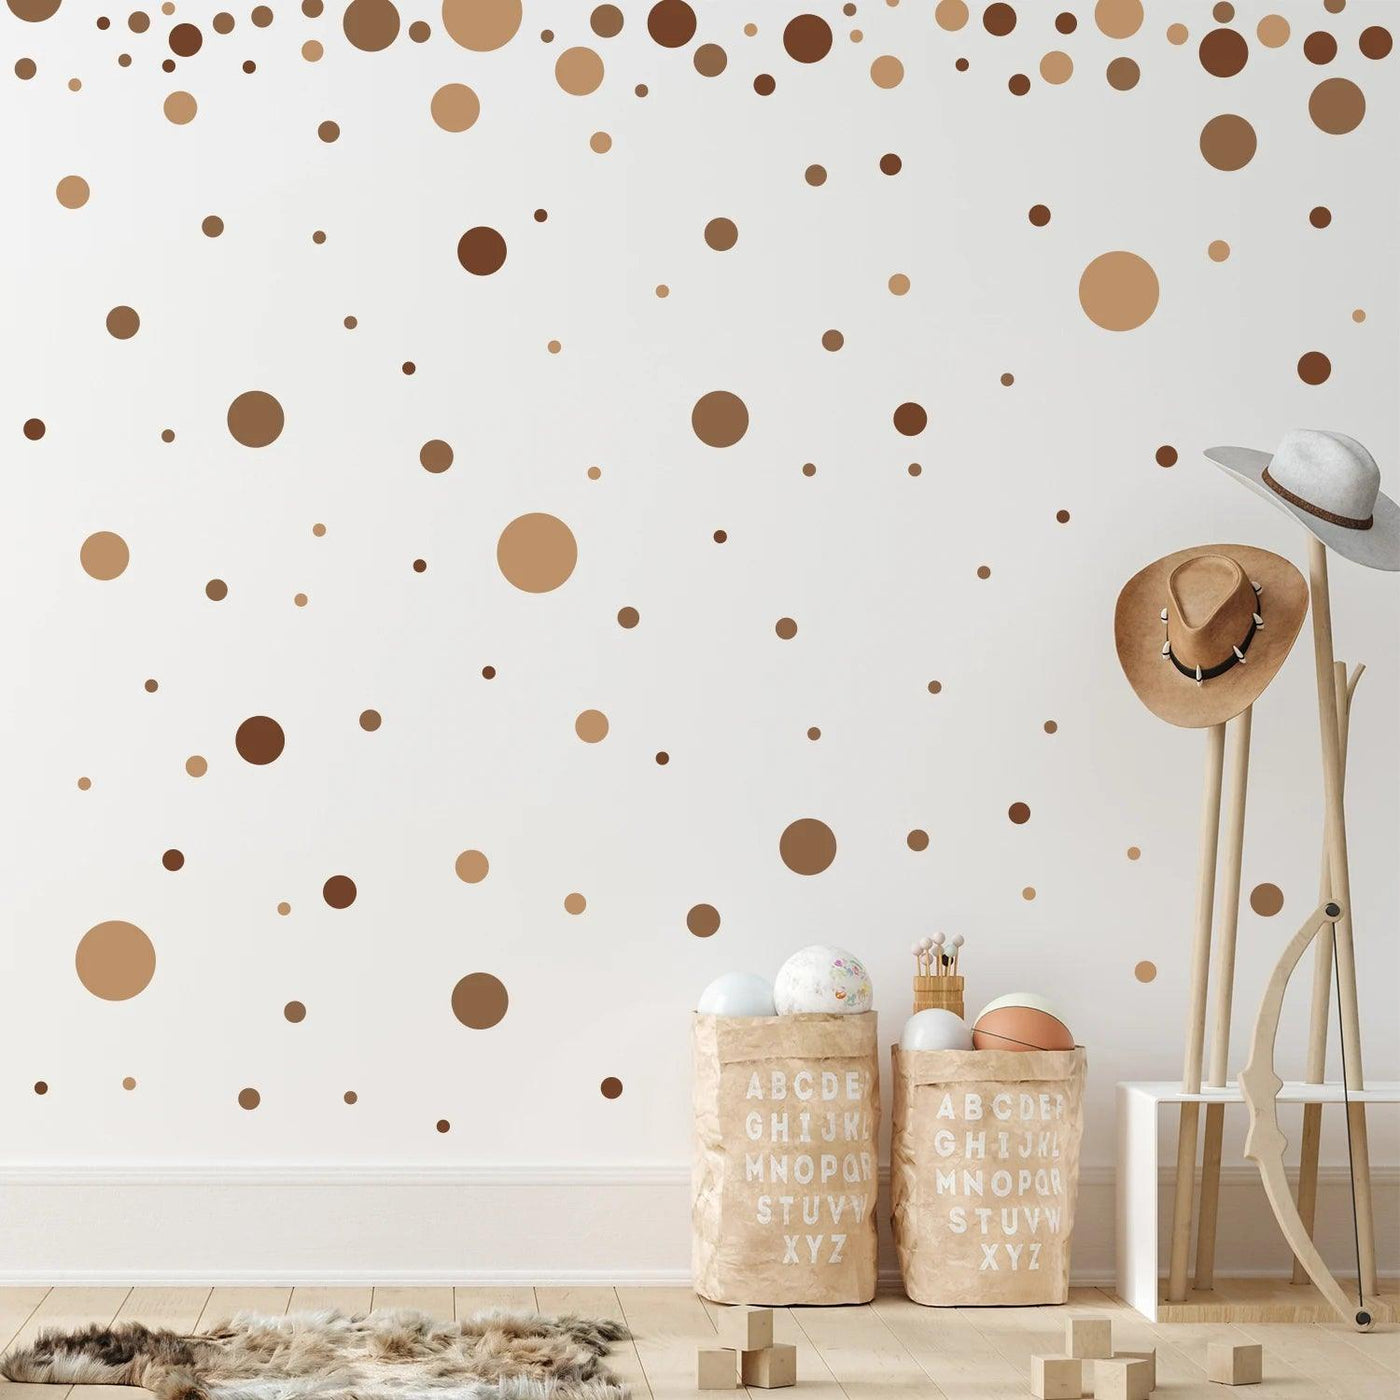 Funlife® 140 PCS Boho Brown Polka Dots Wall Stickers Nursery Removable Vinyl Wall Decal Kids Boy Room Home Decor - Parker and Olive